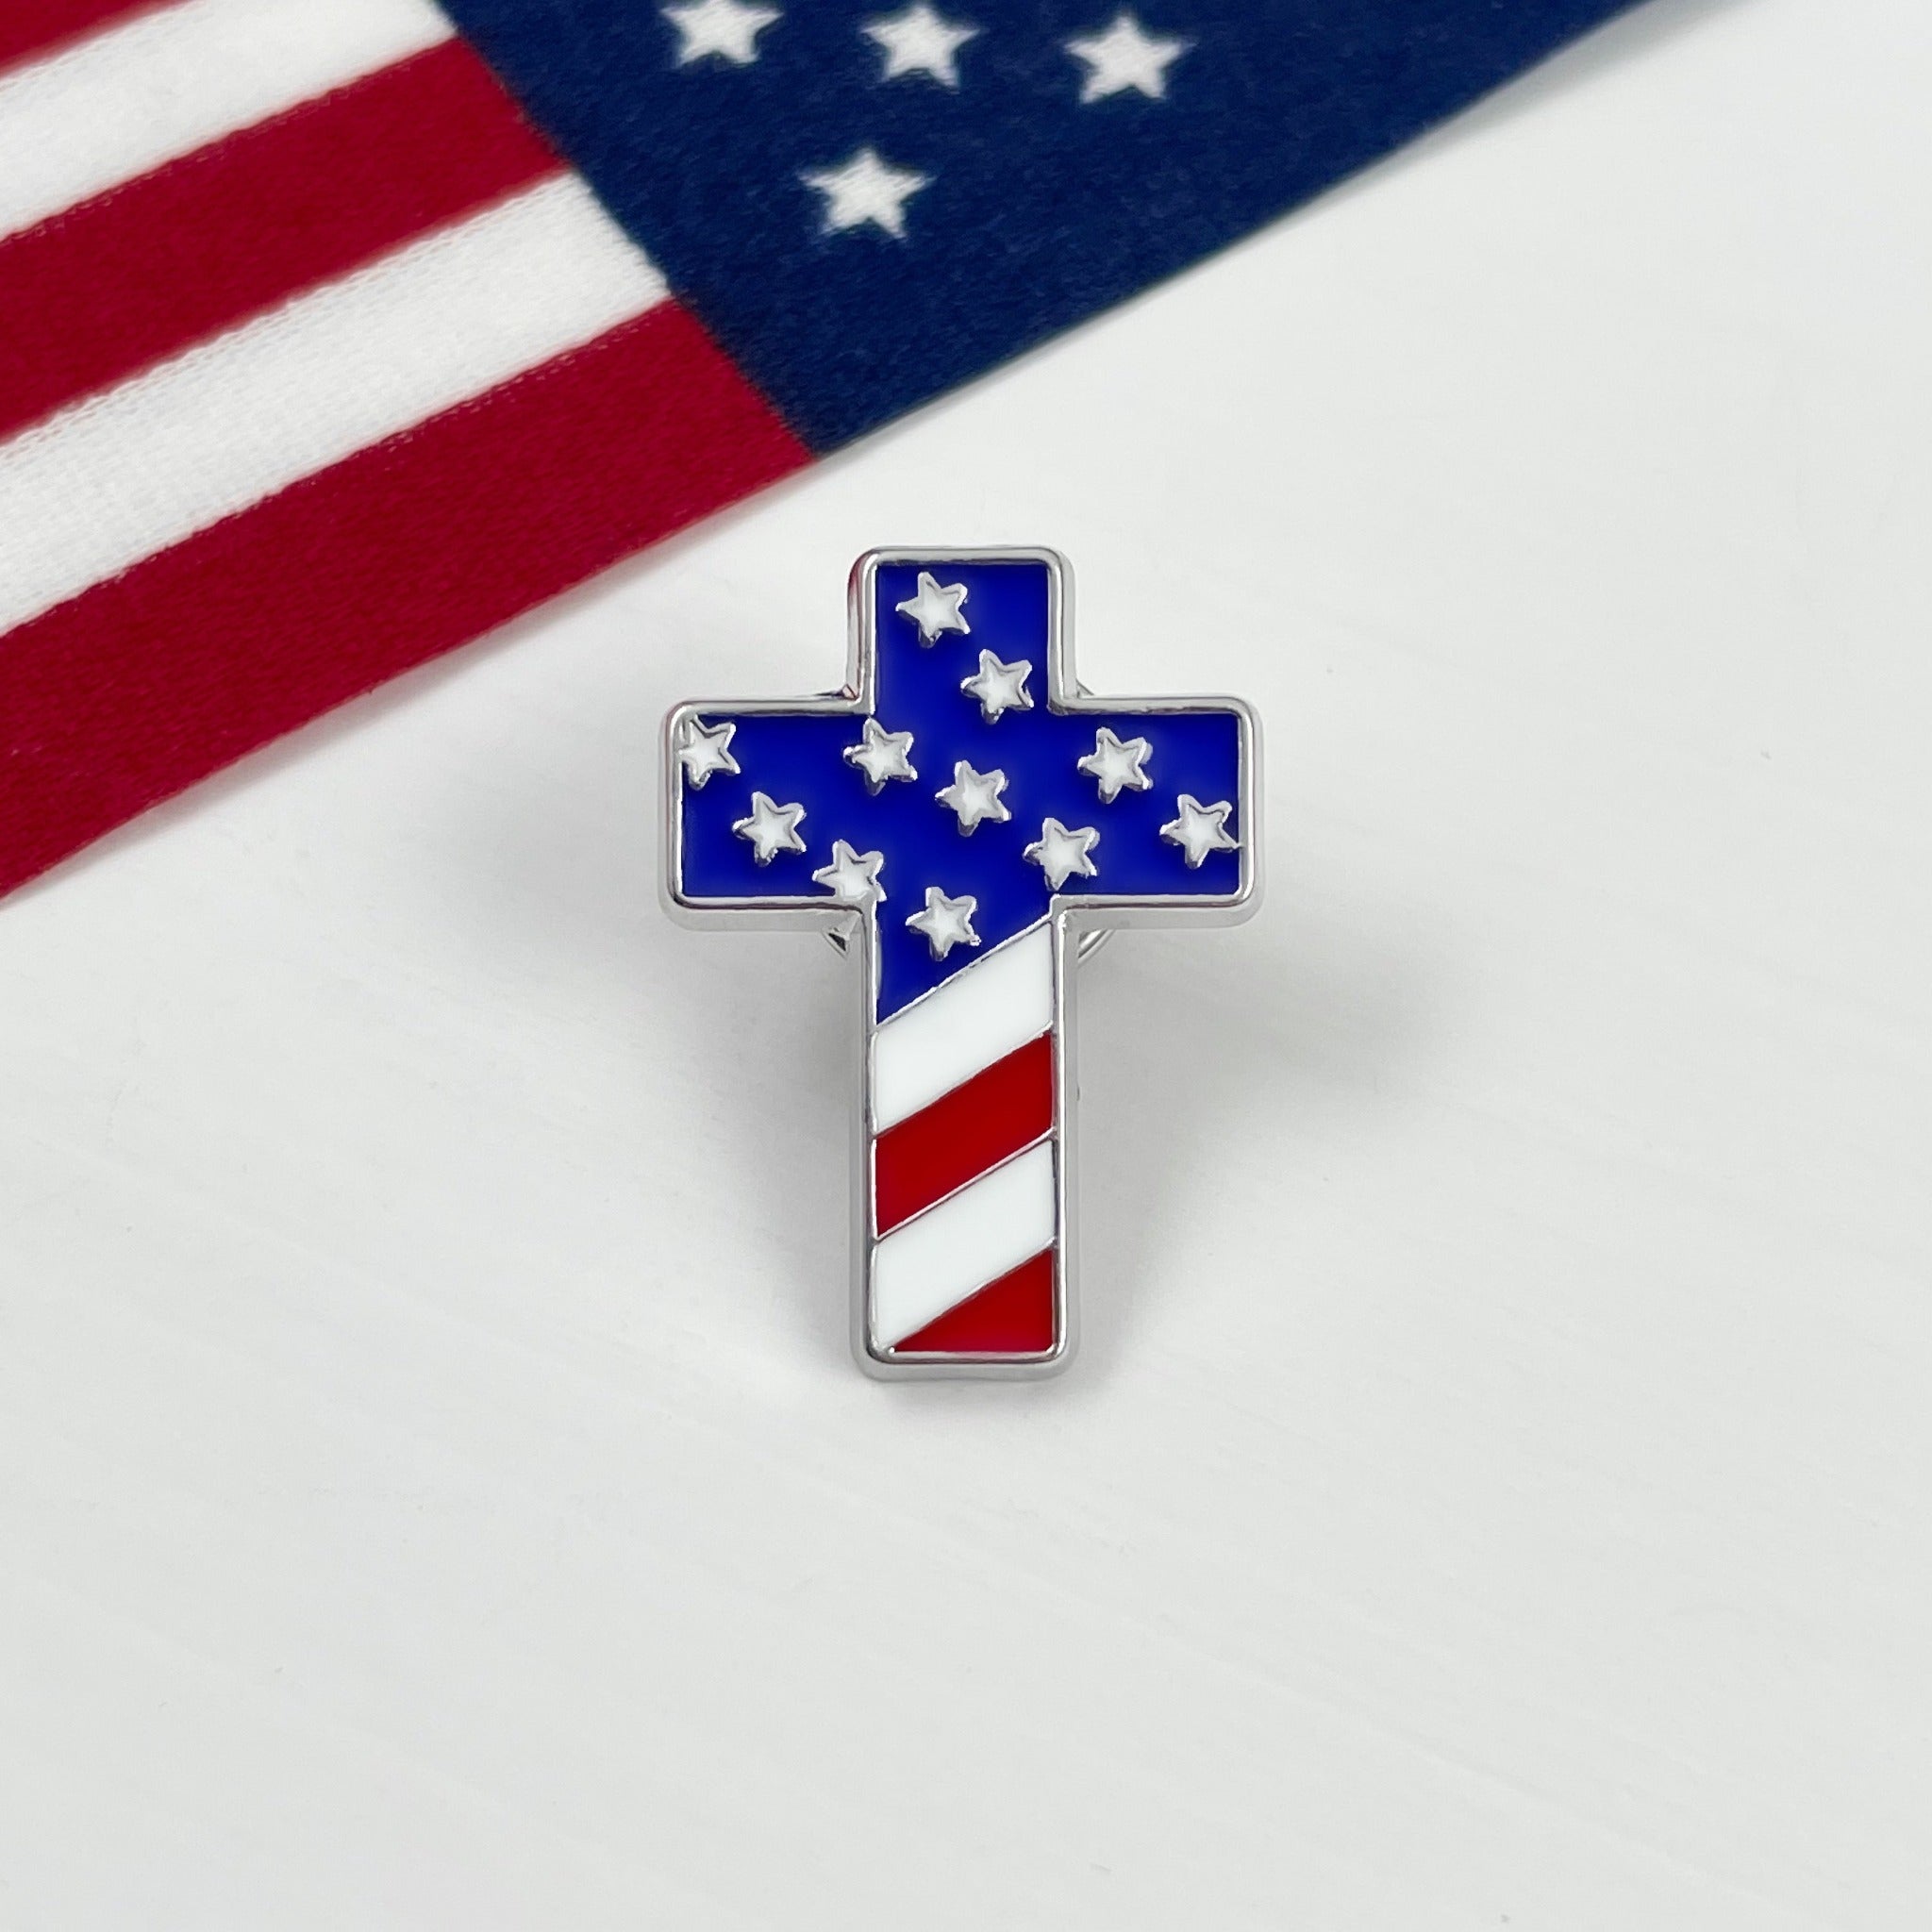 Fashion Jewelry Brooches USA American Flag Brooch Crystal Insect Broche Pin Jewelry Designer Custom Brooches for Women